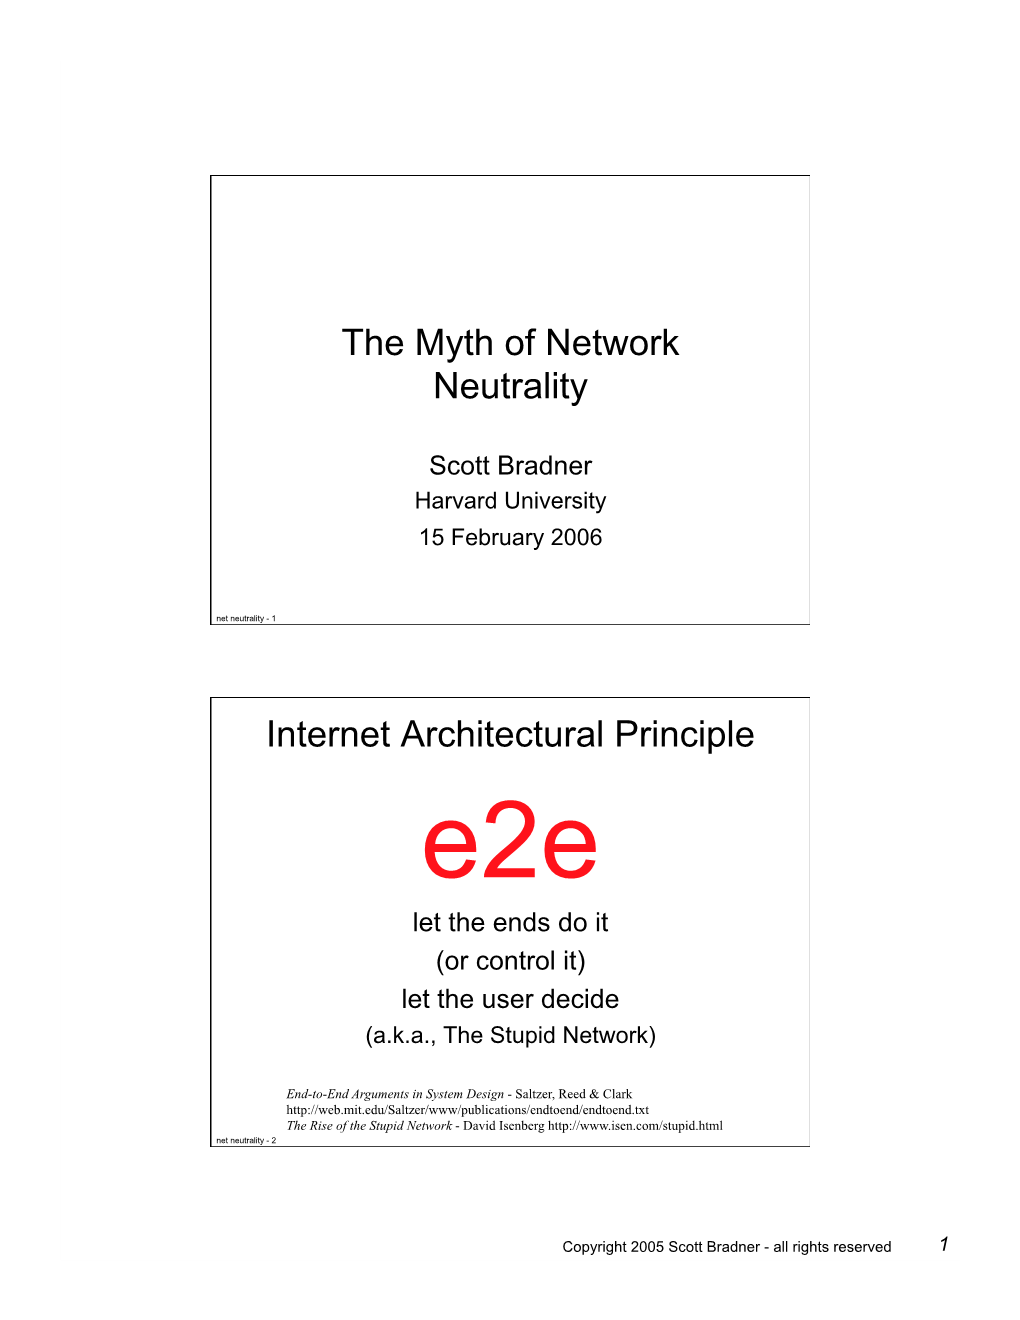 The Myth of Network Neutrality Internet Architectural Principle